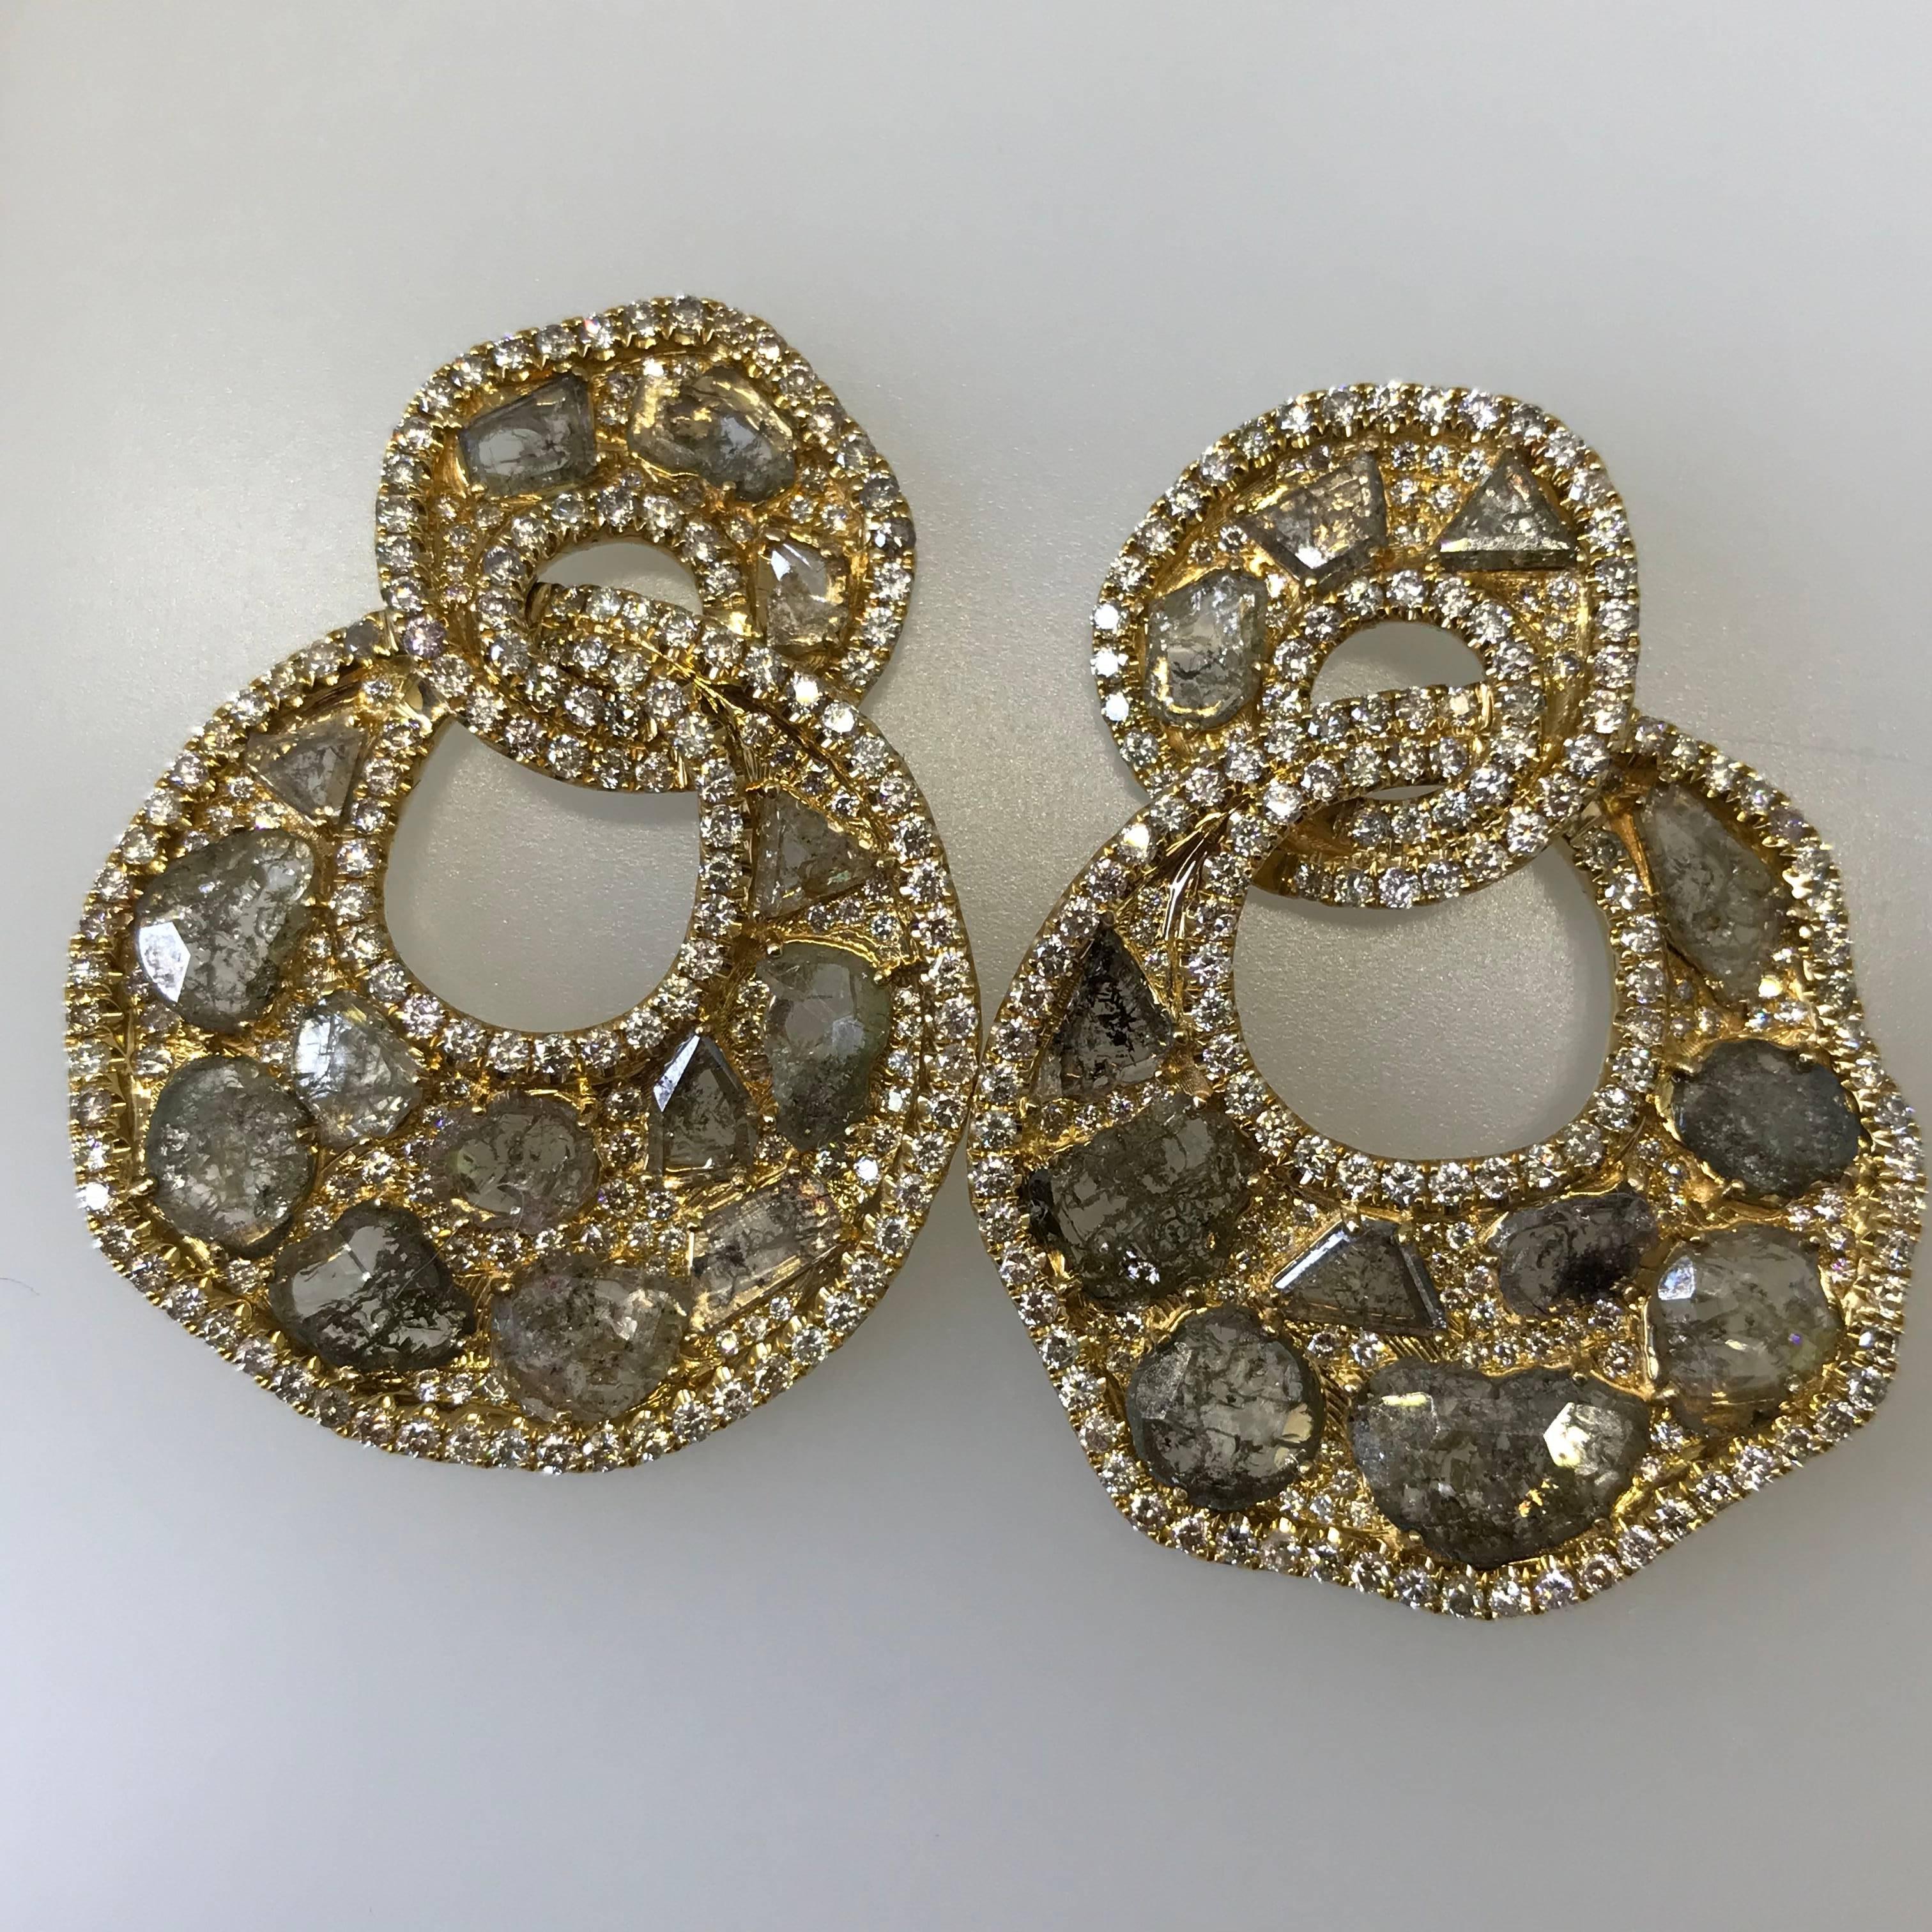 These beautiful Trendy earrings are one of a kind which makes you extraordinary.
The earrings are made of 18 k Yellow gold total 23.21 grams.
These earrings are studded with 26 flat Diamonds total weight 4.40 Carats
along with 398 white diamonds